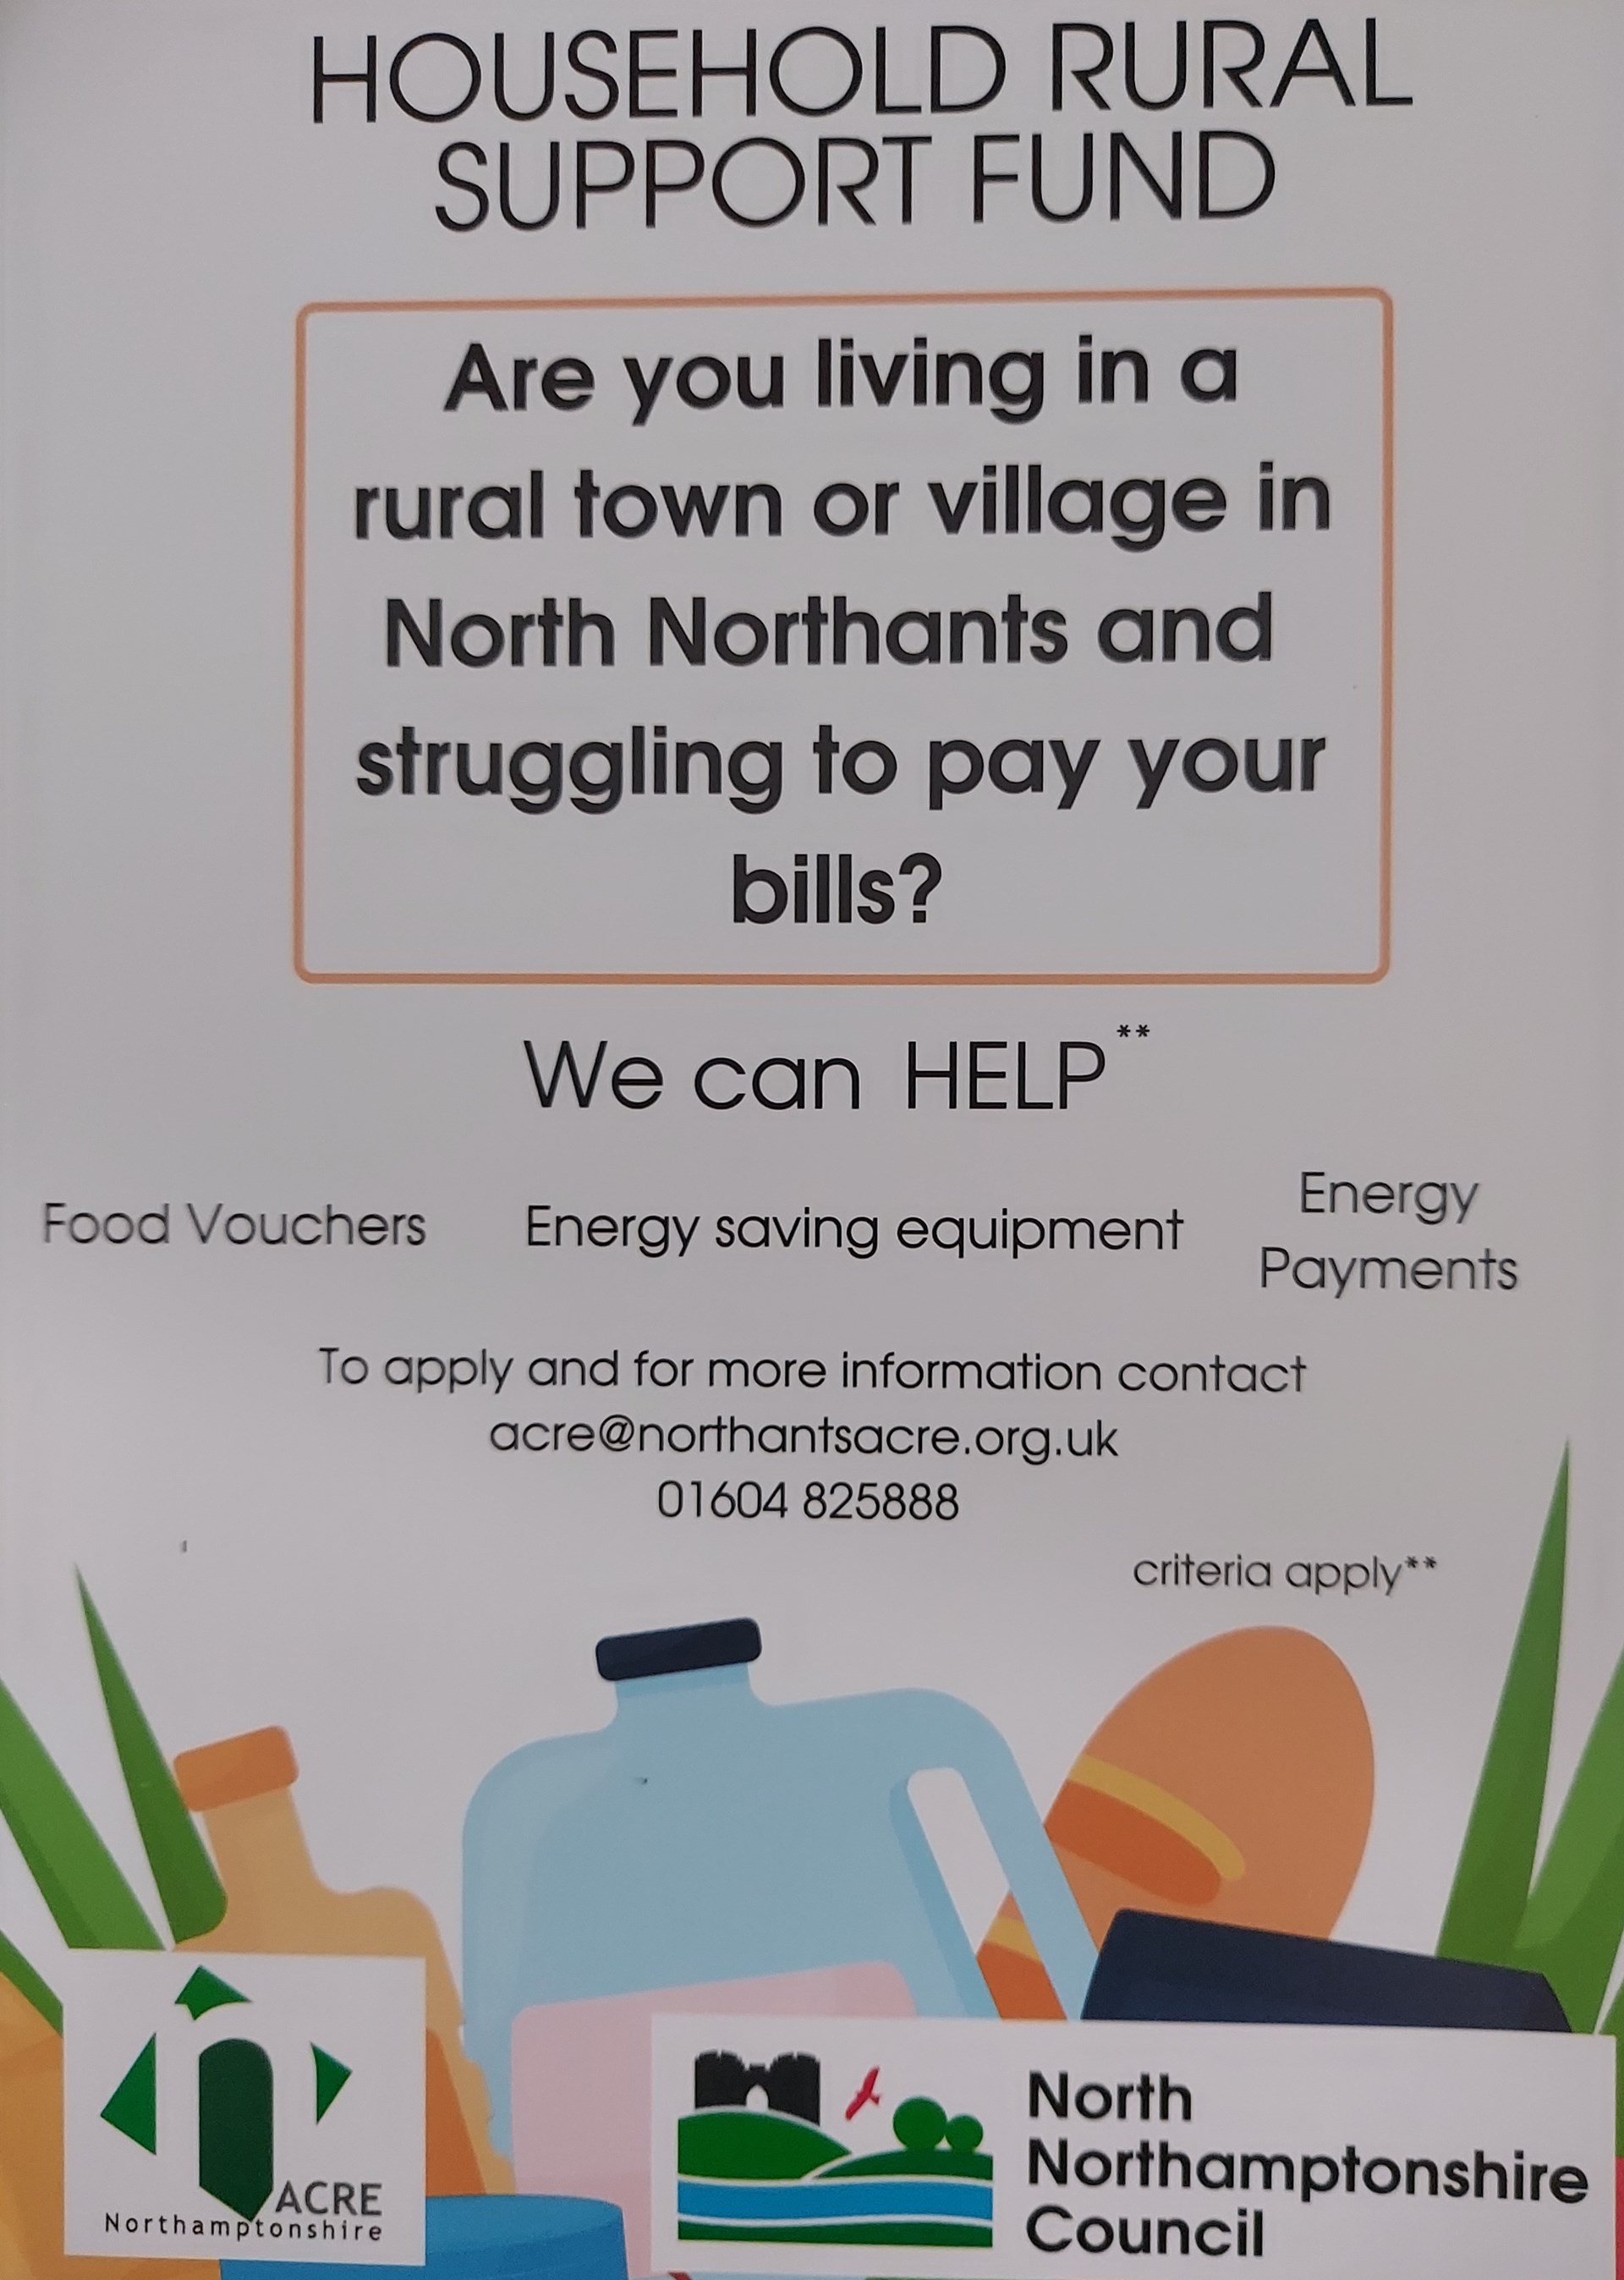 Broughton Parish Council Household Rural Support Fund